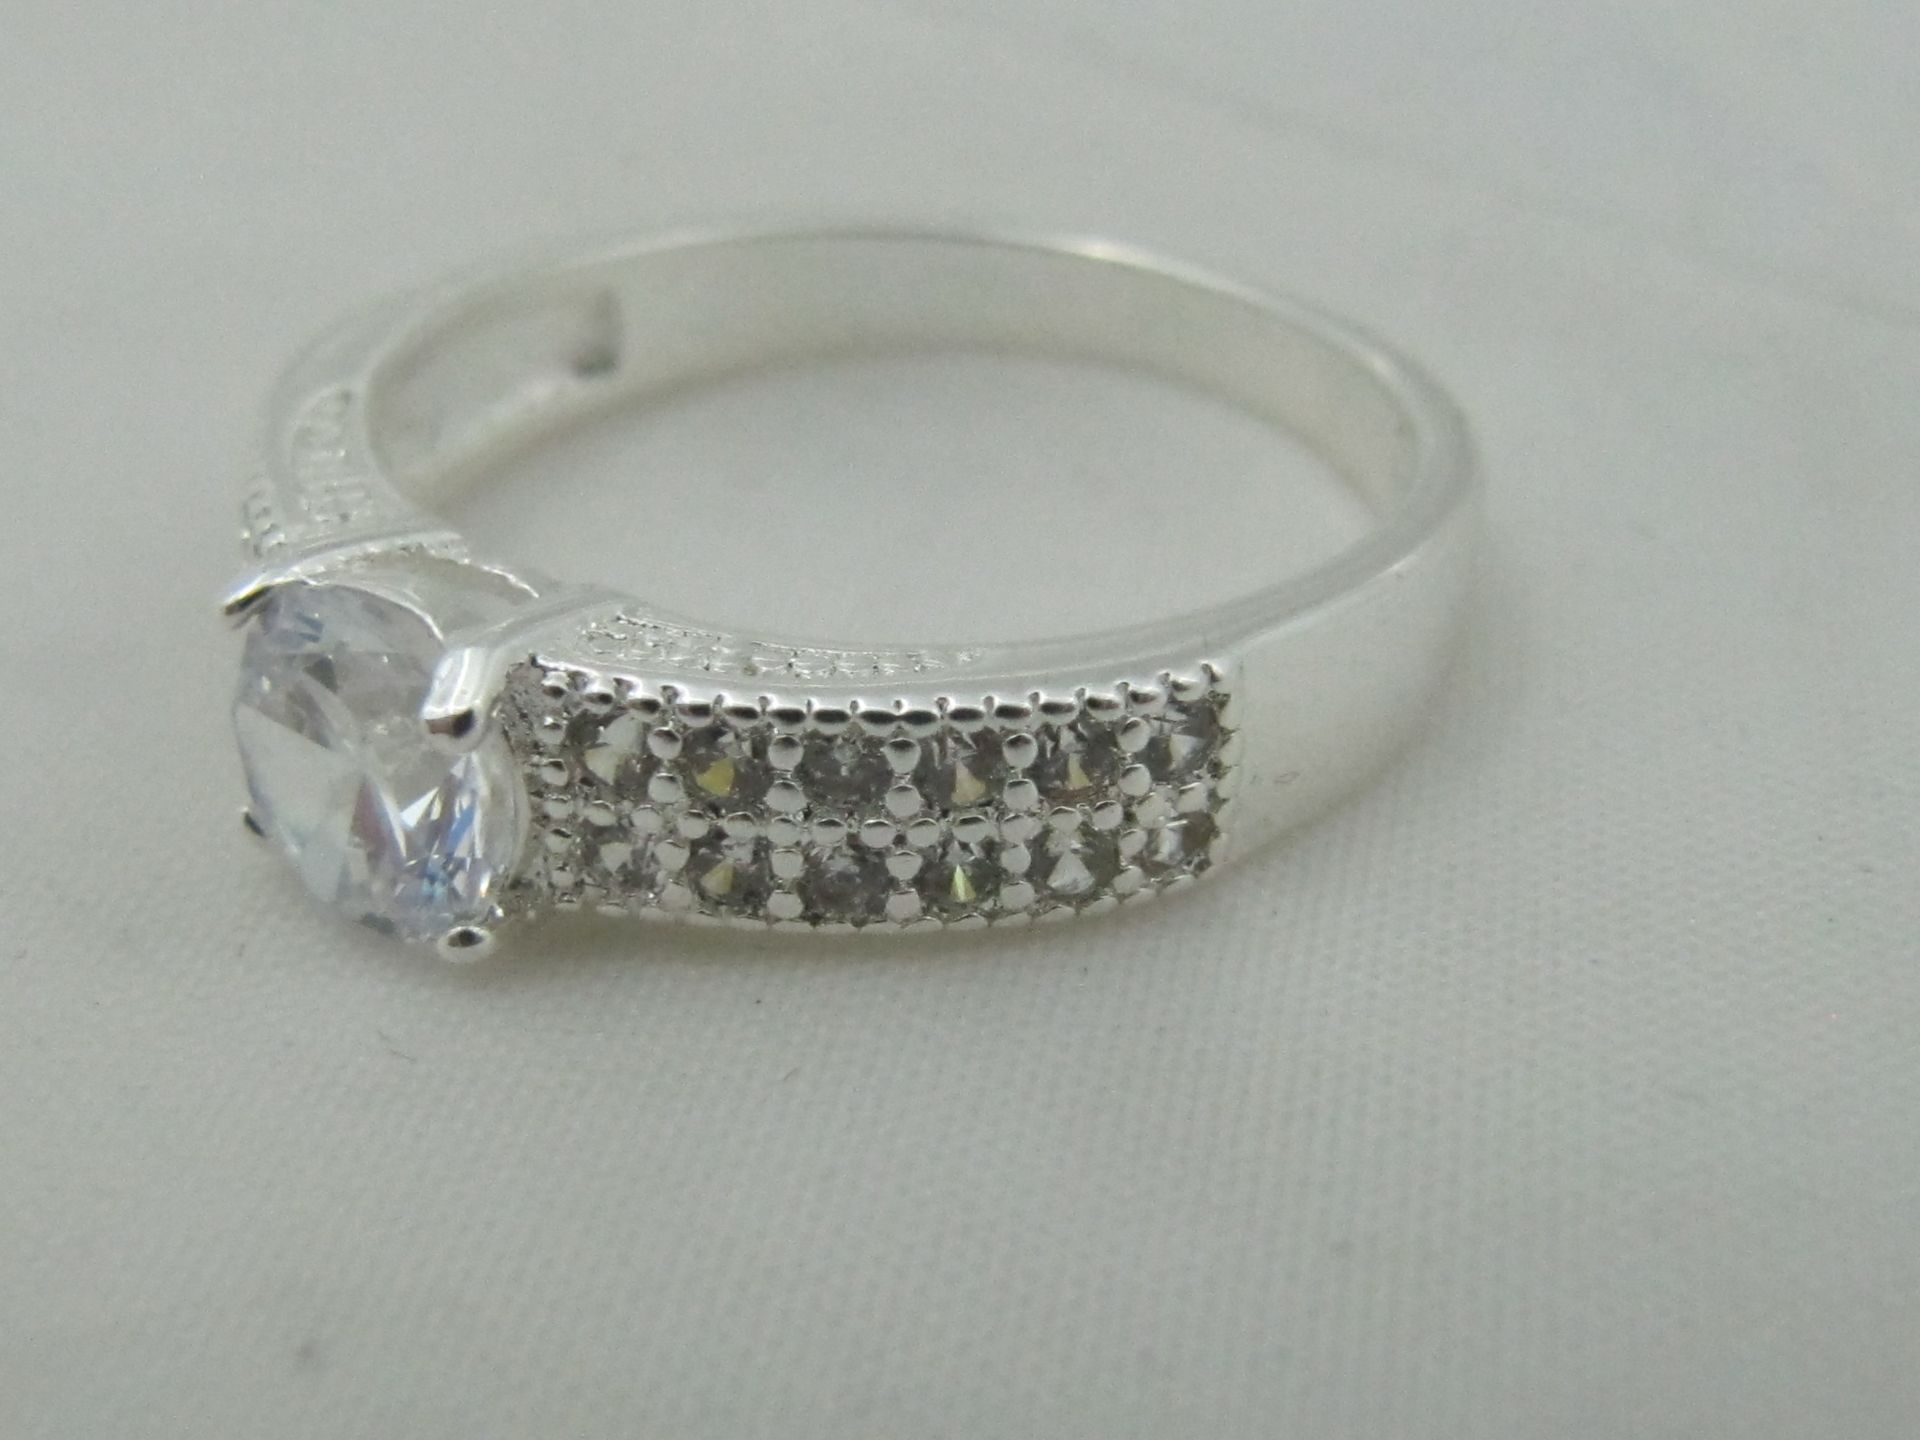 925 Solid Silver Ring with Crystals. Size P.